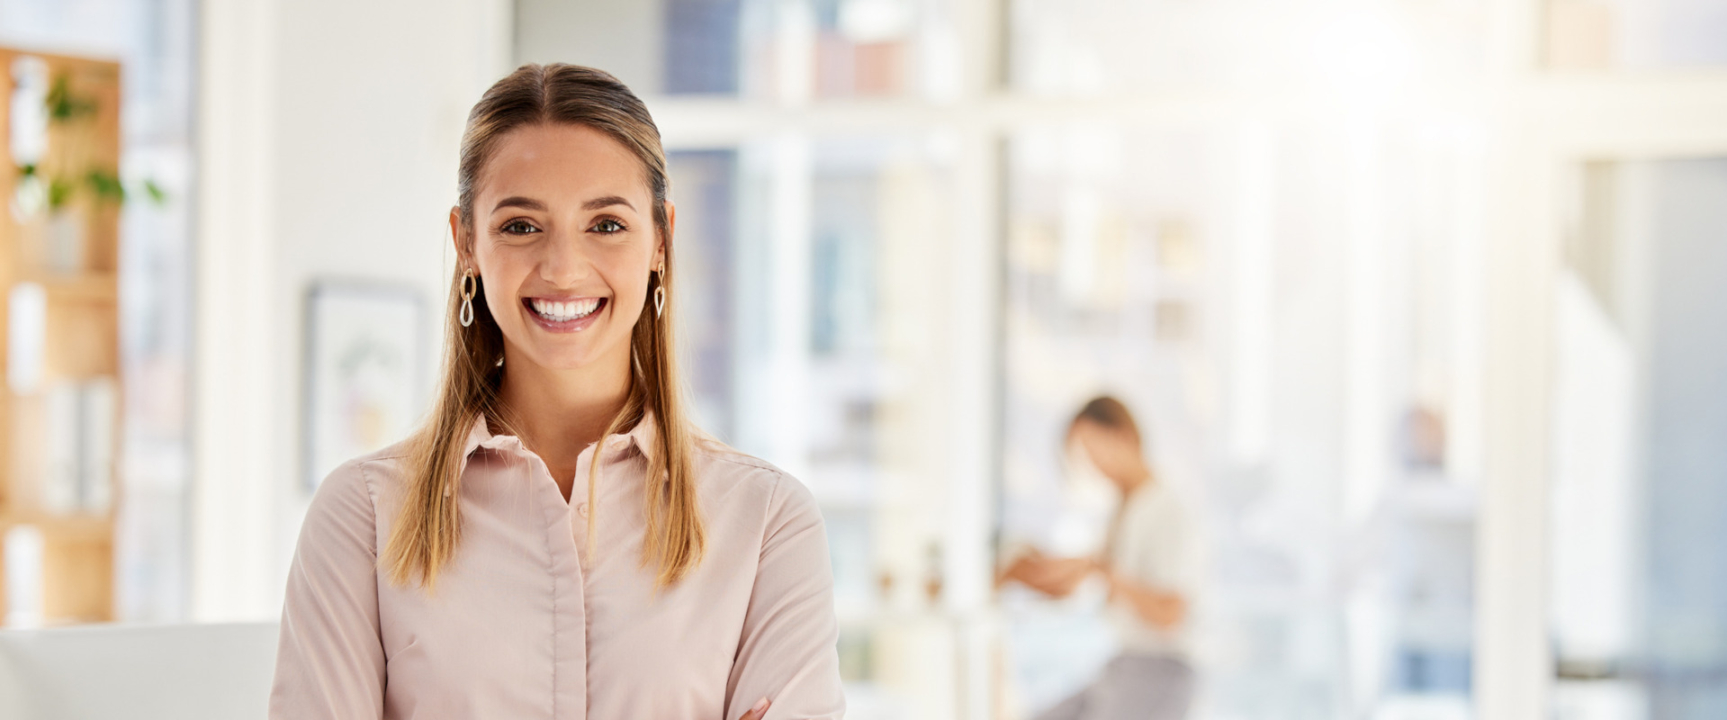 Happy, business leader and woman with a smile in success with crossed arms in a light office. Portrait of a professional and confident white female employee in leadership and management at a company